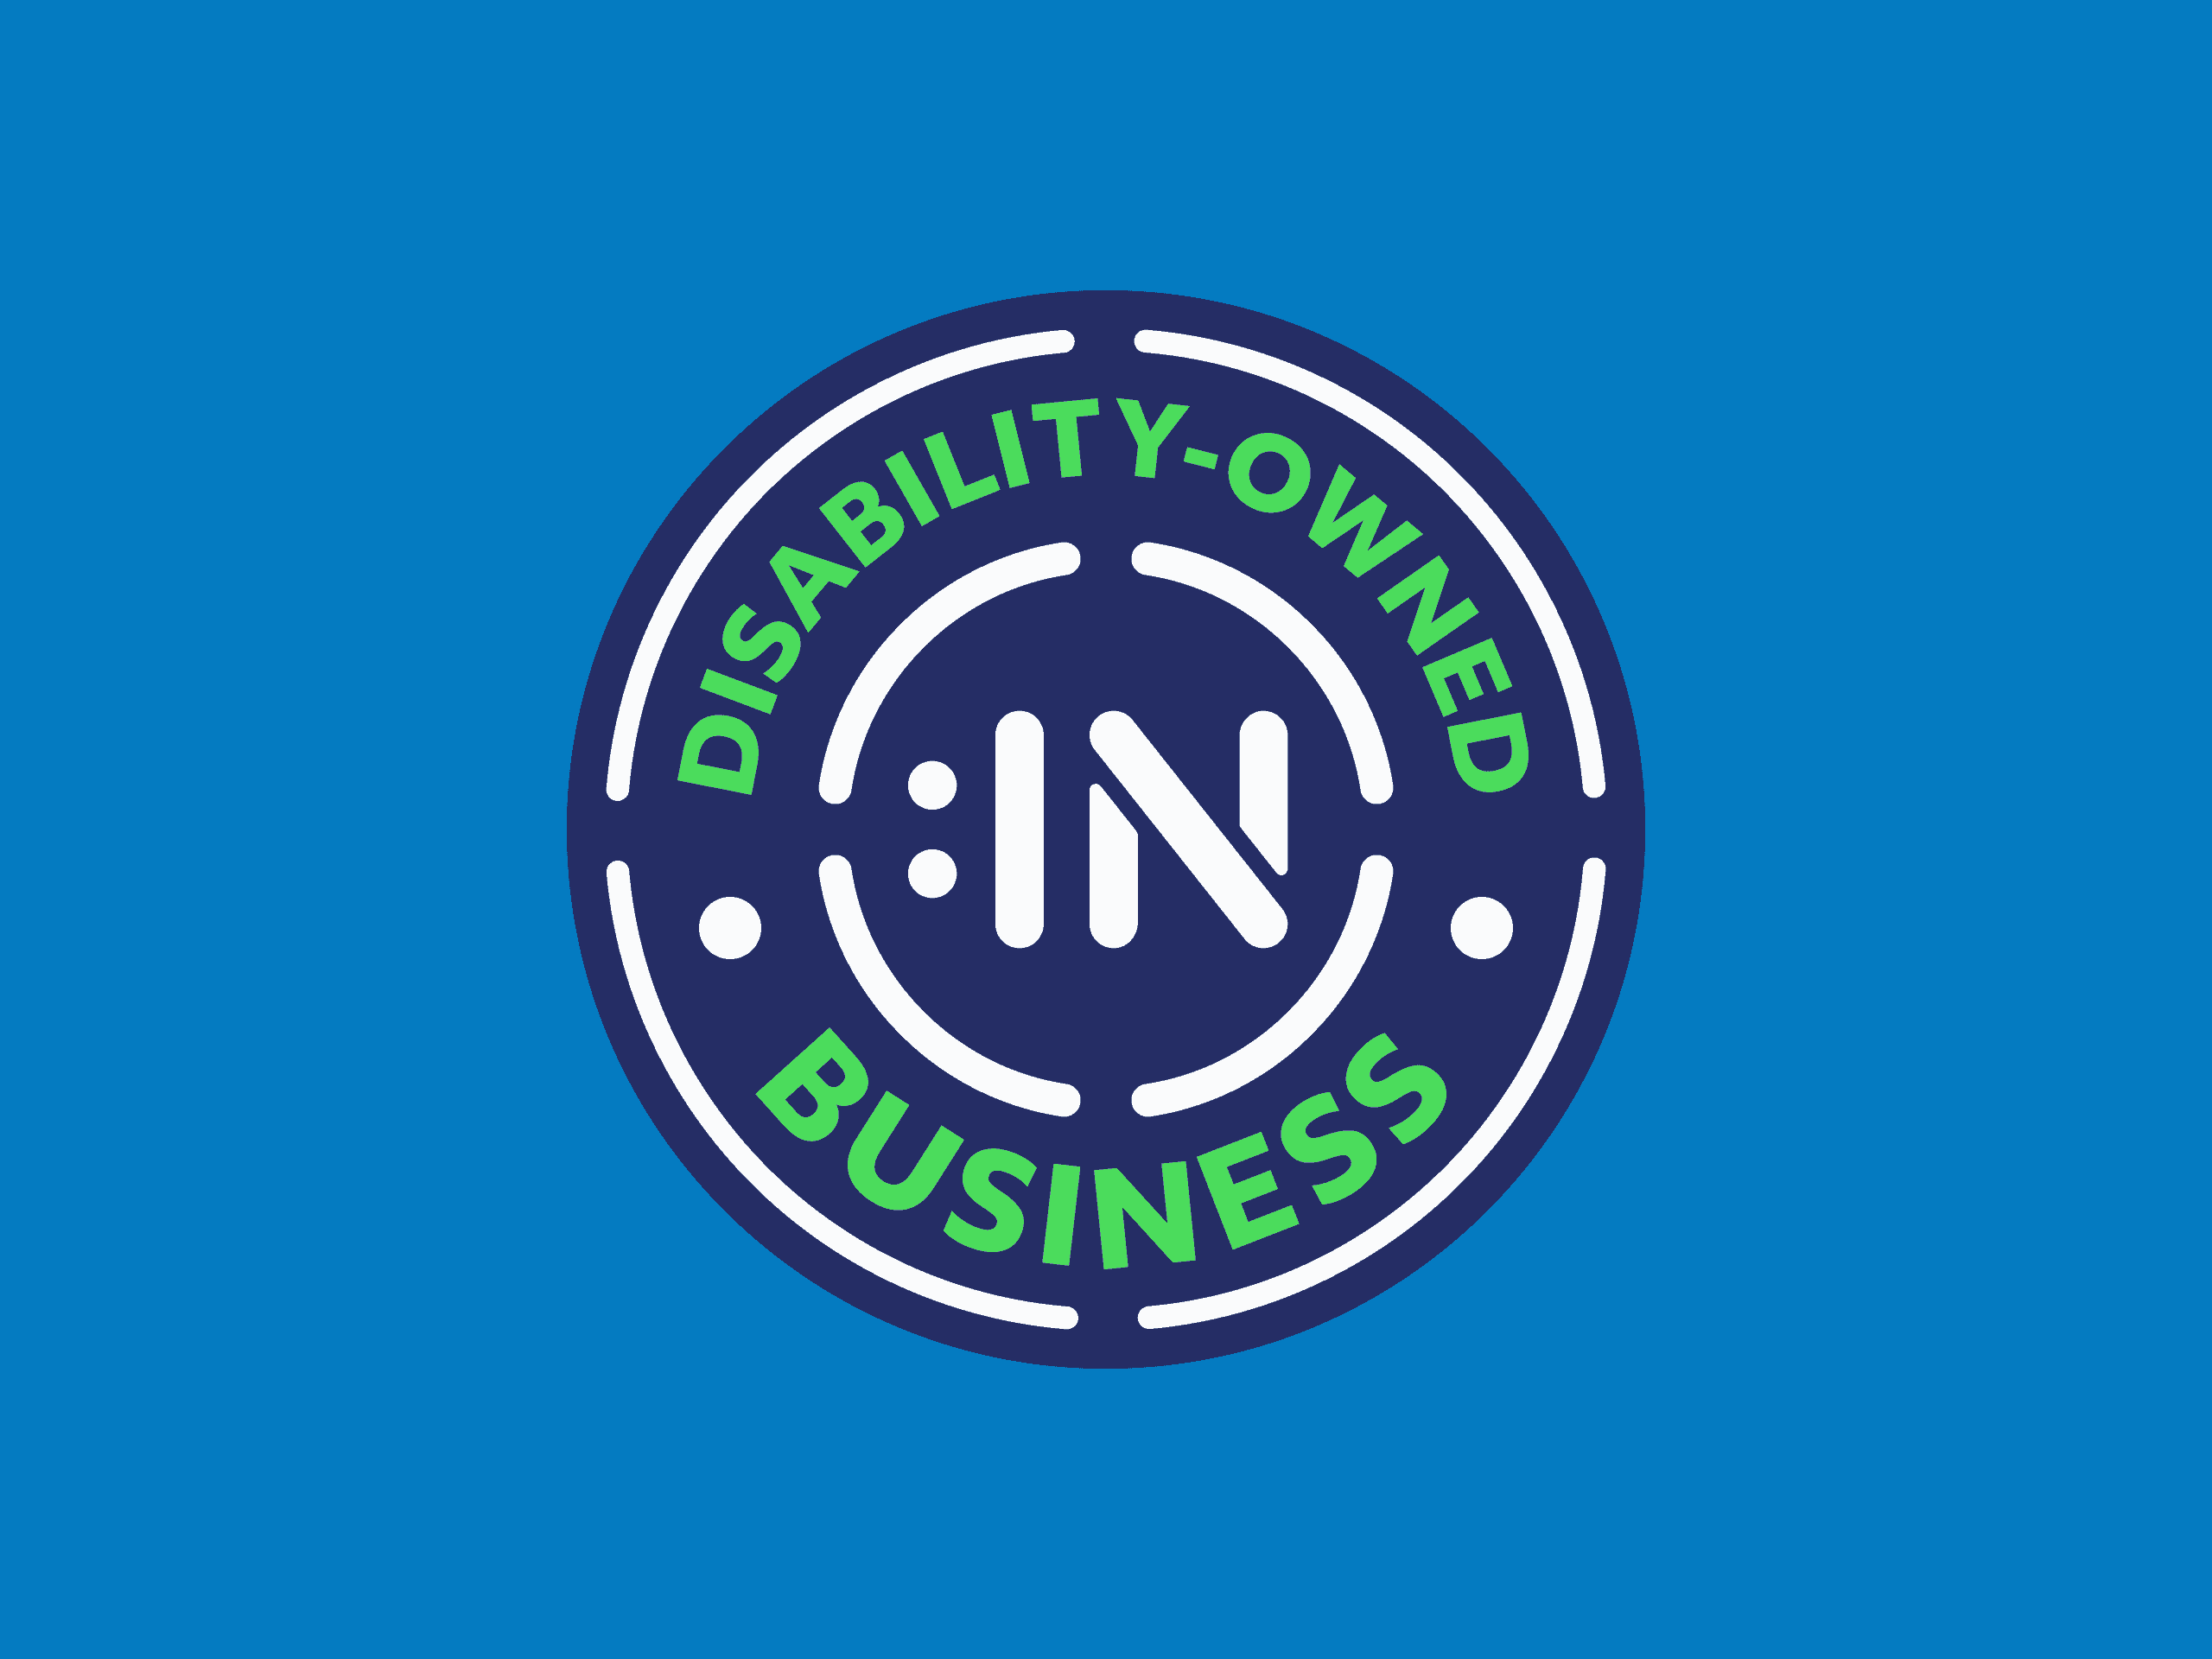 Disability owned business logo on a blue background.